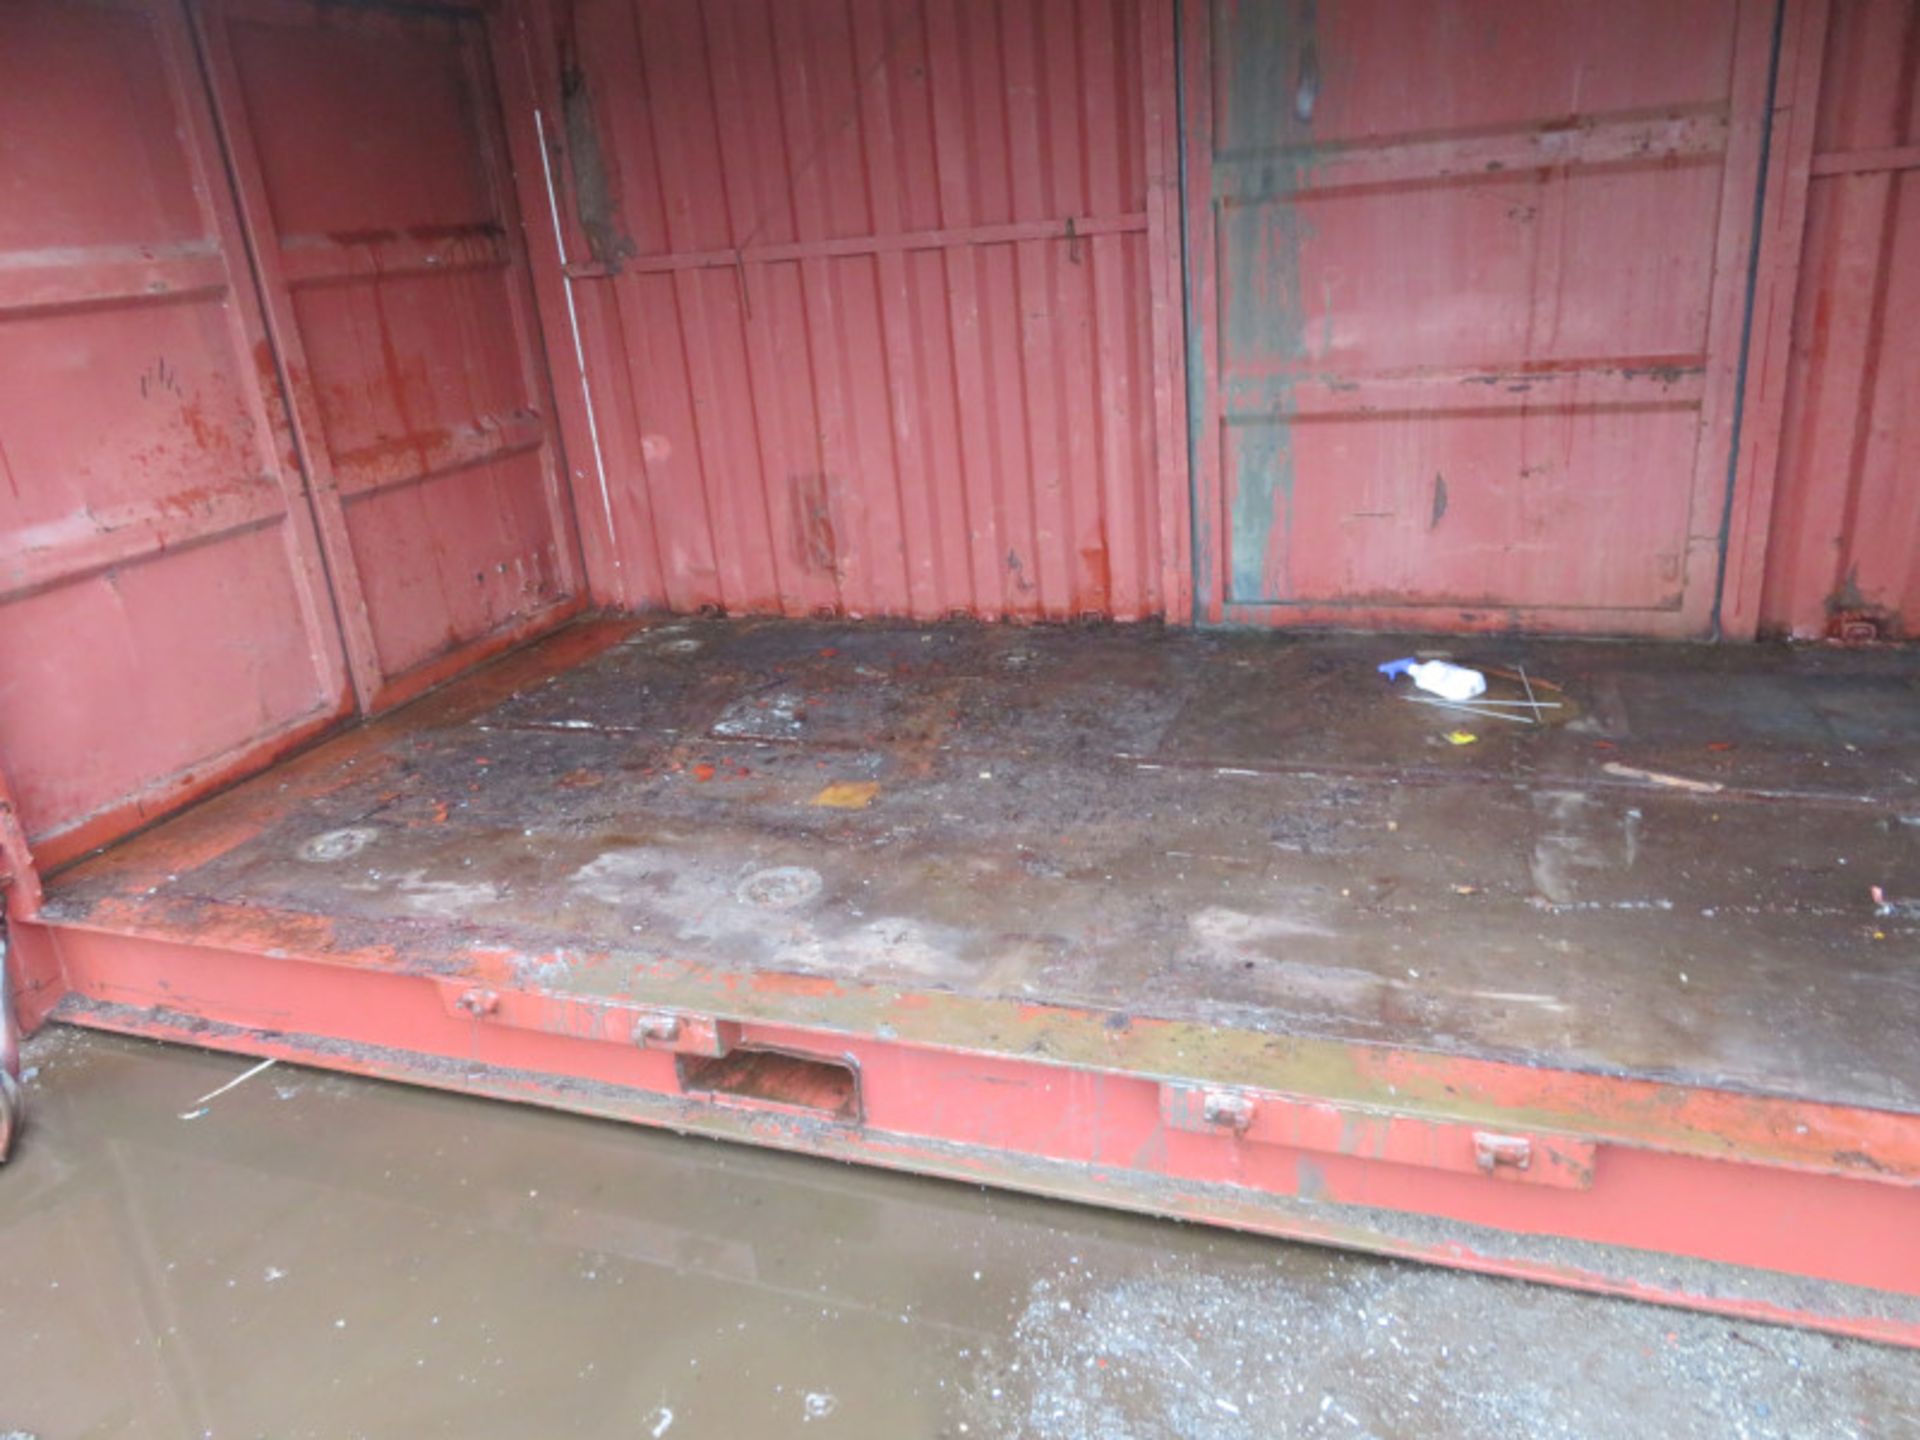 20ft Side and end opening Iso container - 8ft x 8ft x 20ft External Dimensions (Very poor - Image 6 of 10